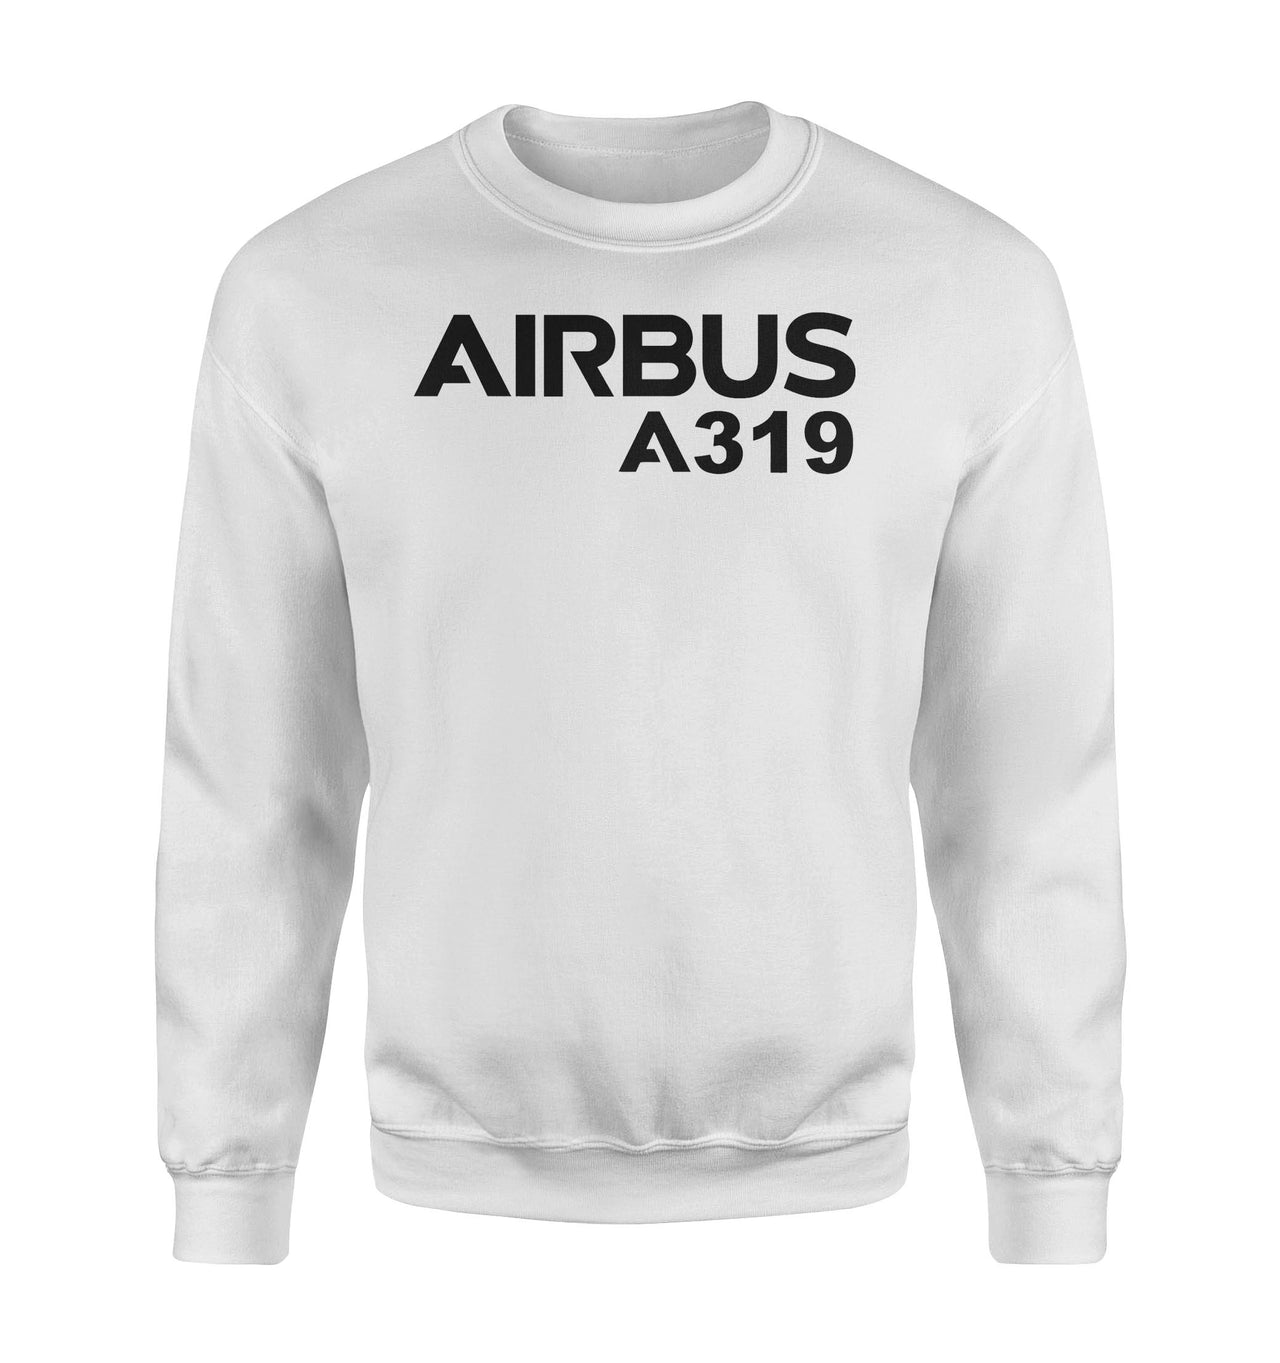 Airbus A319 & Text Designed Sweatshirts